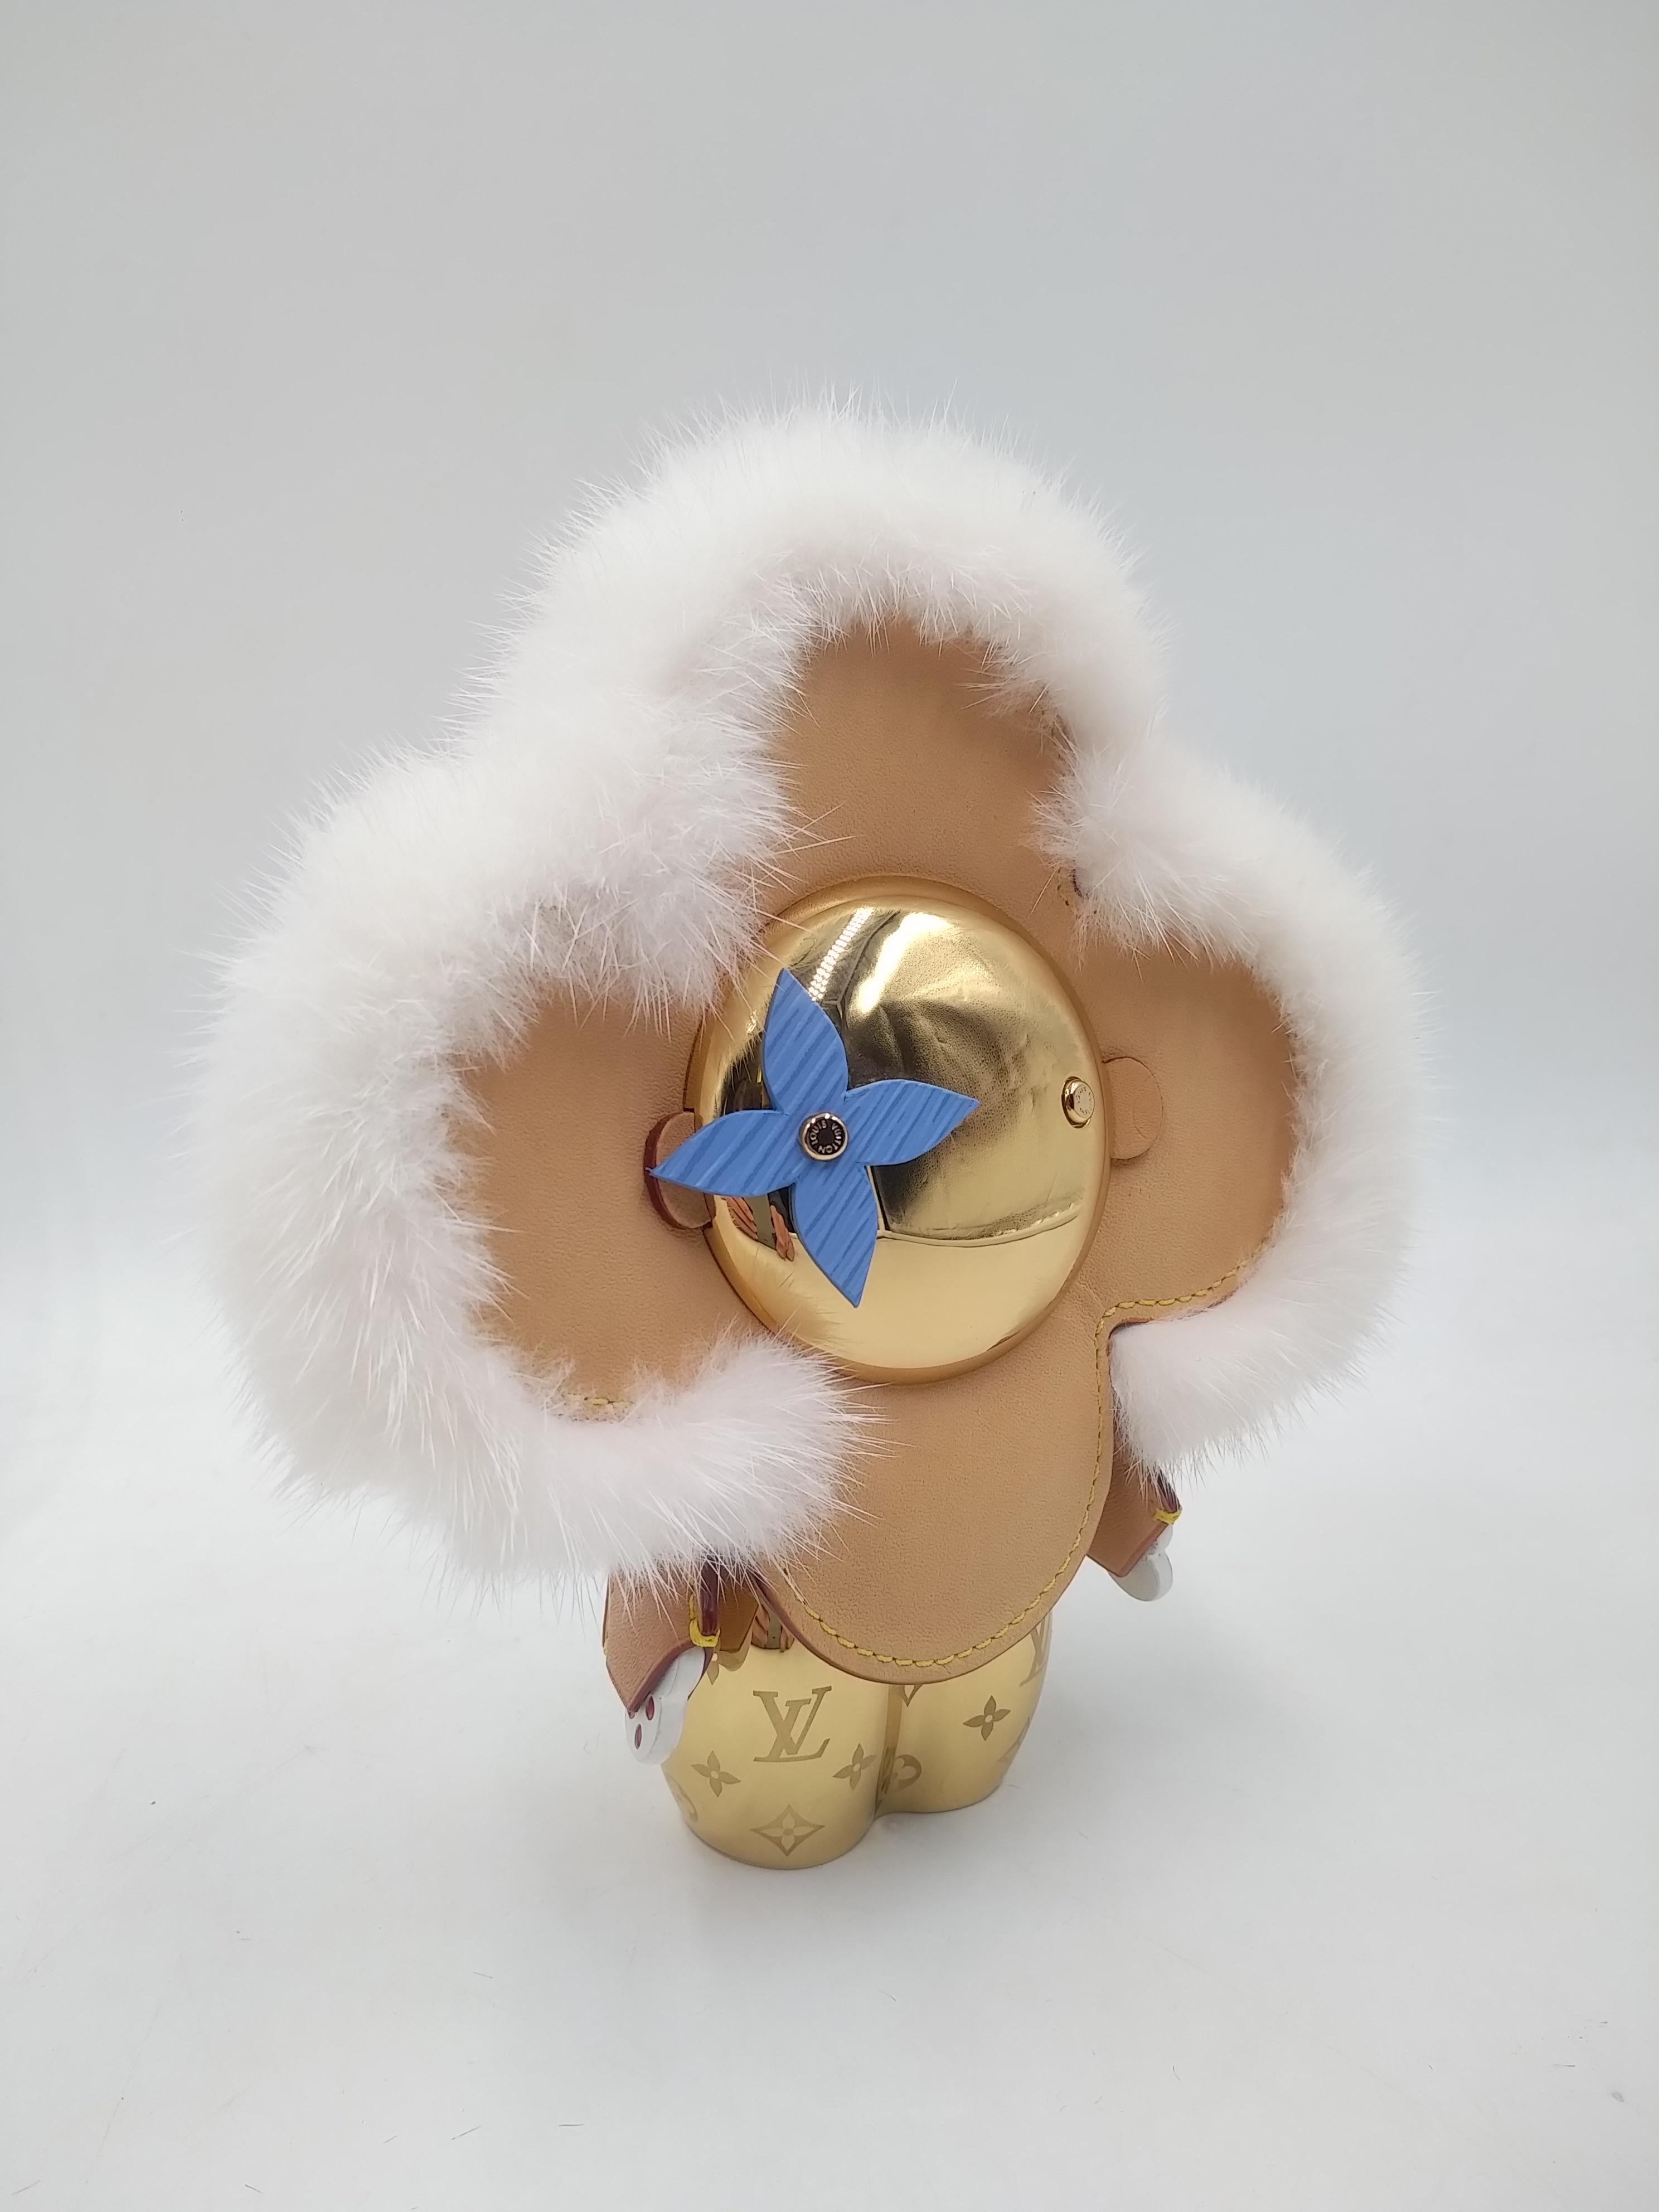 Louis Vuitton Metal Mink Fur Glossy Mini Vivienne Gold, 2018
- 100% authentic Louis Vuitton
- the mascot body is in gold-colored metal with the engraved monogram, mink fur, leather and Monogram Flower eyes detail
- comes with plexiglass box for